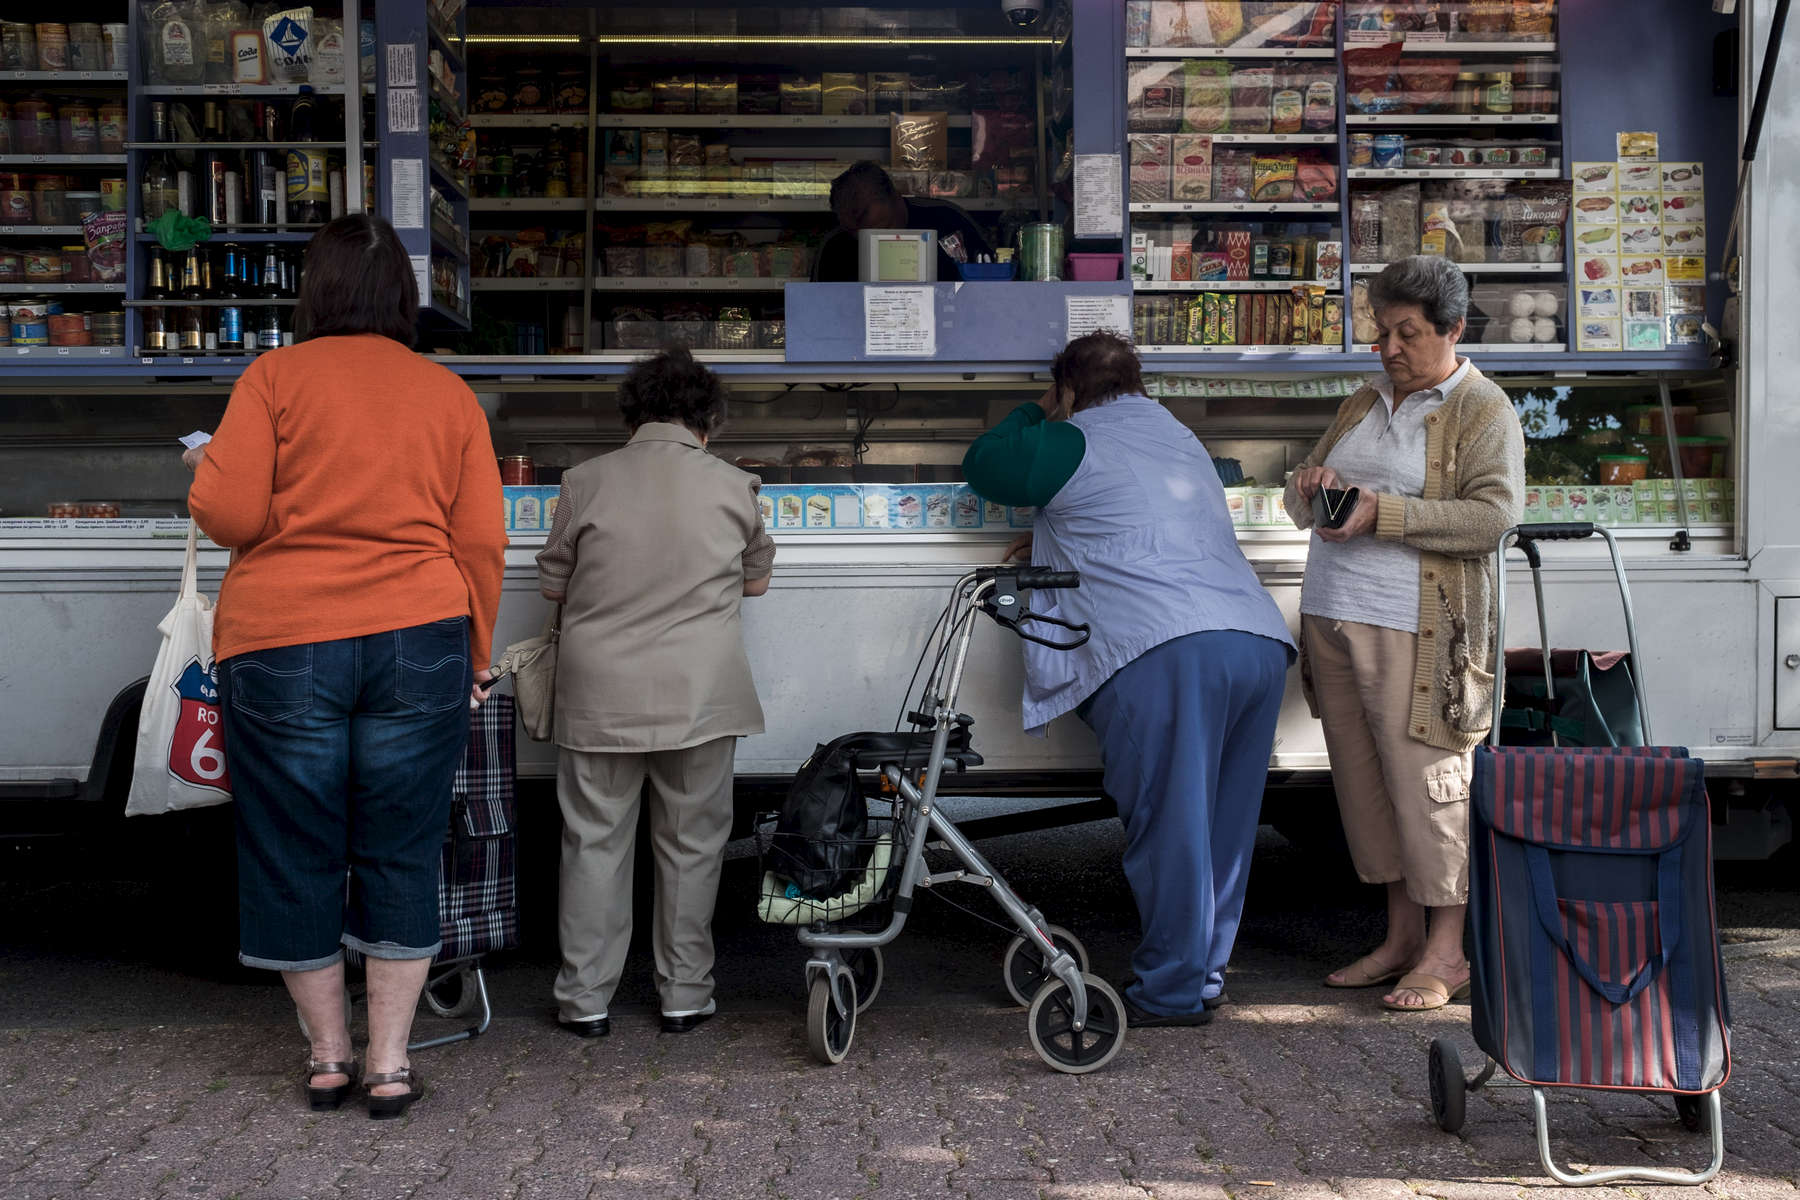 Women are buying groceries at a mobile market in Frankfurt's district Praunheim